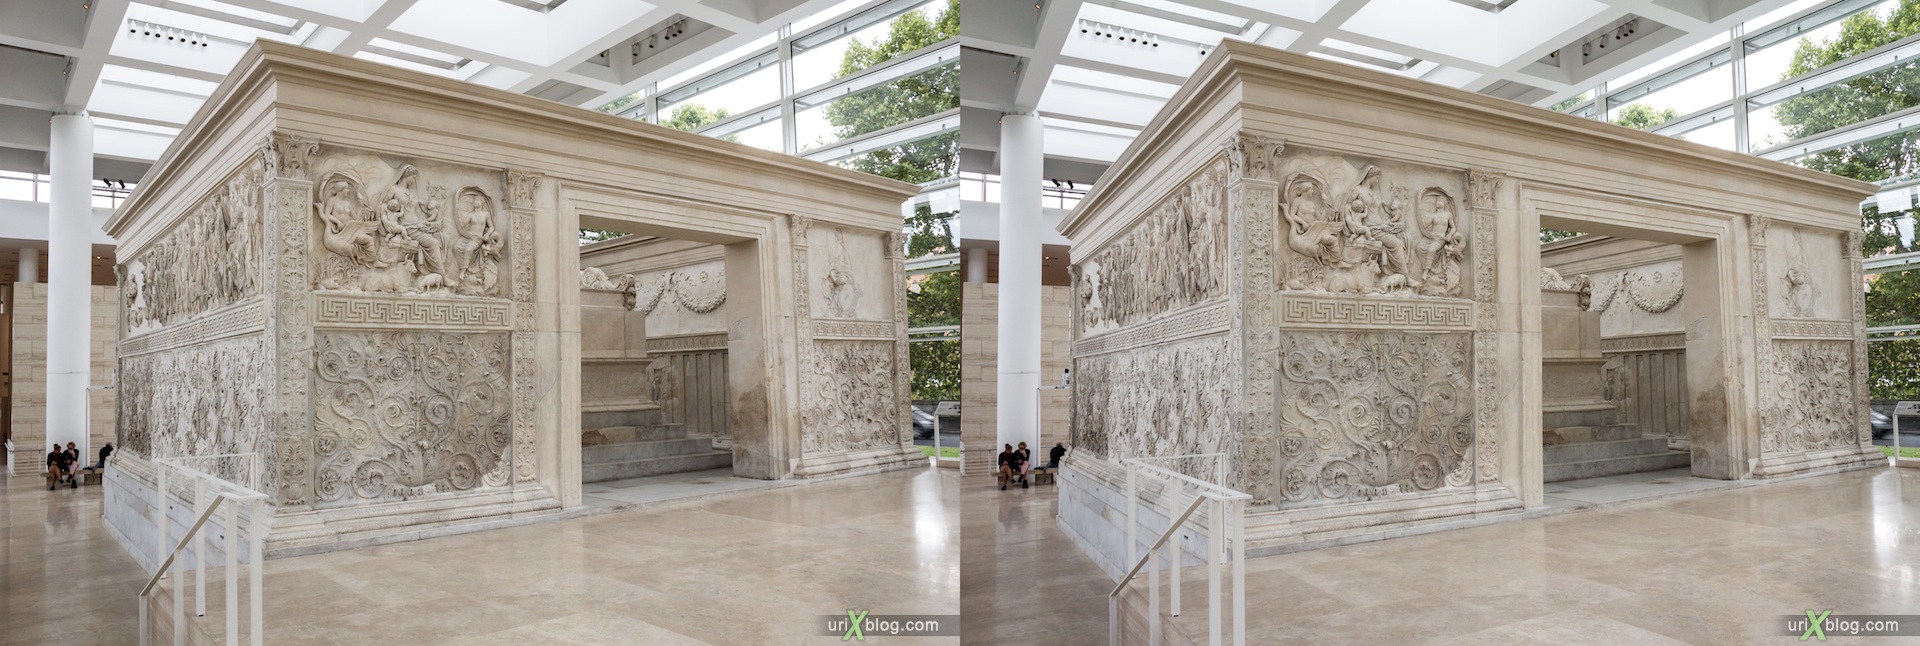 2012, Ara Pacis, Altar of Augustan Peace, Rome, Italy, Europe, 3D, stereo pair, cross-eyed, crossview, cross view stereo pair